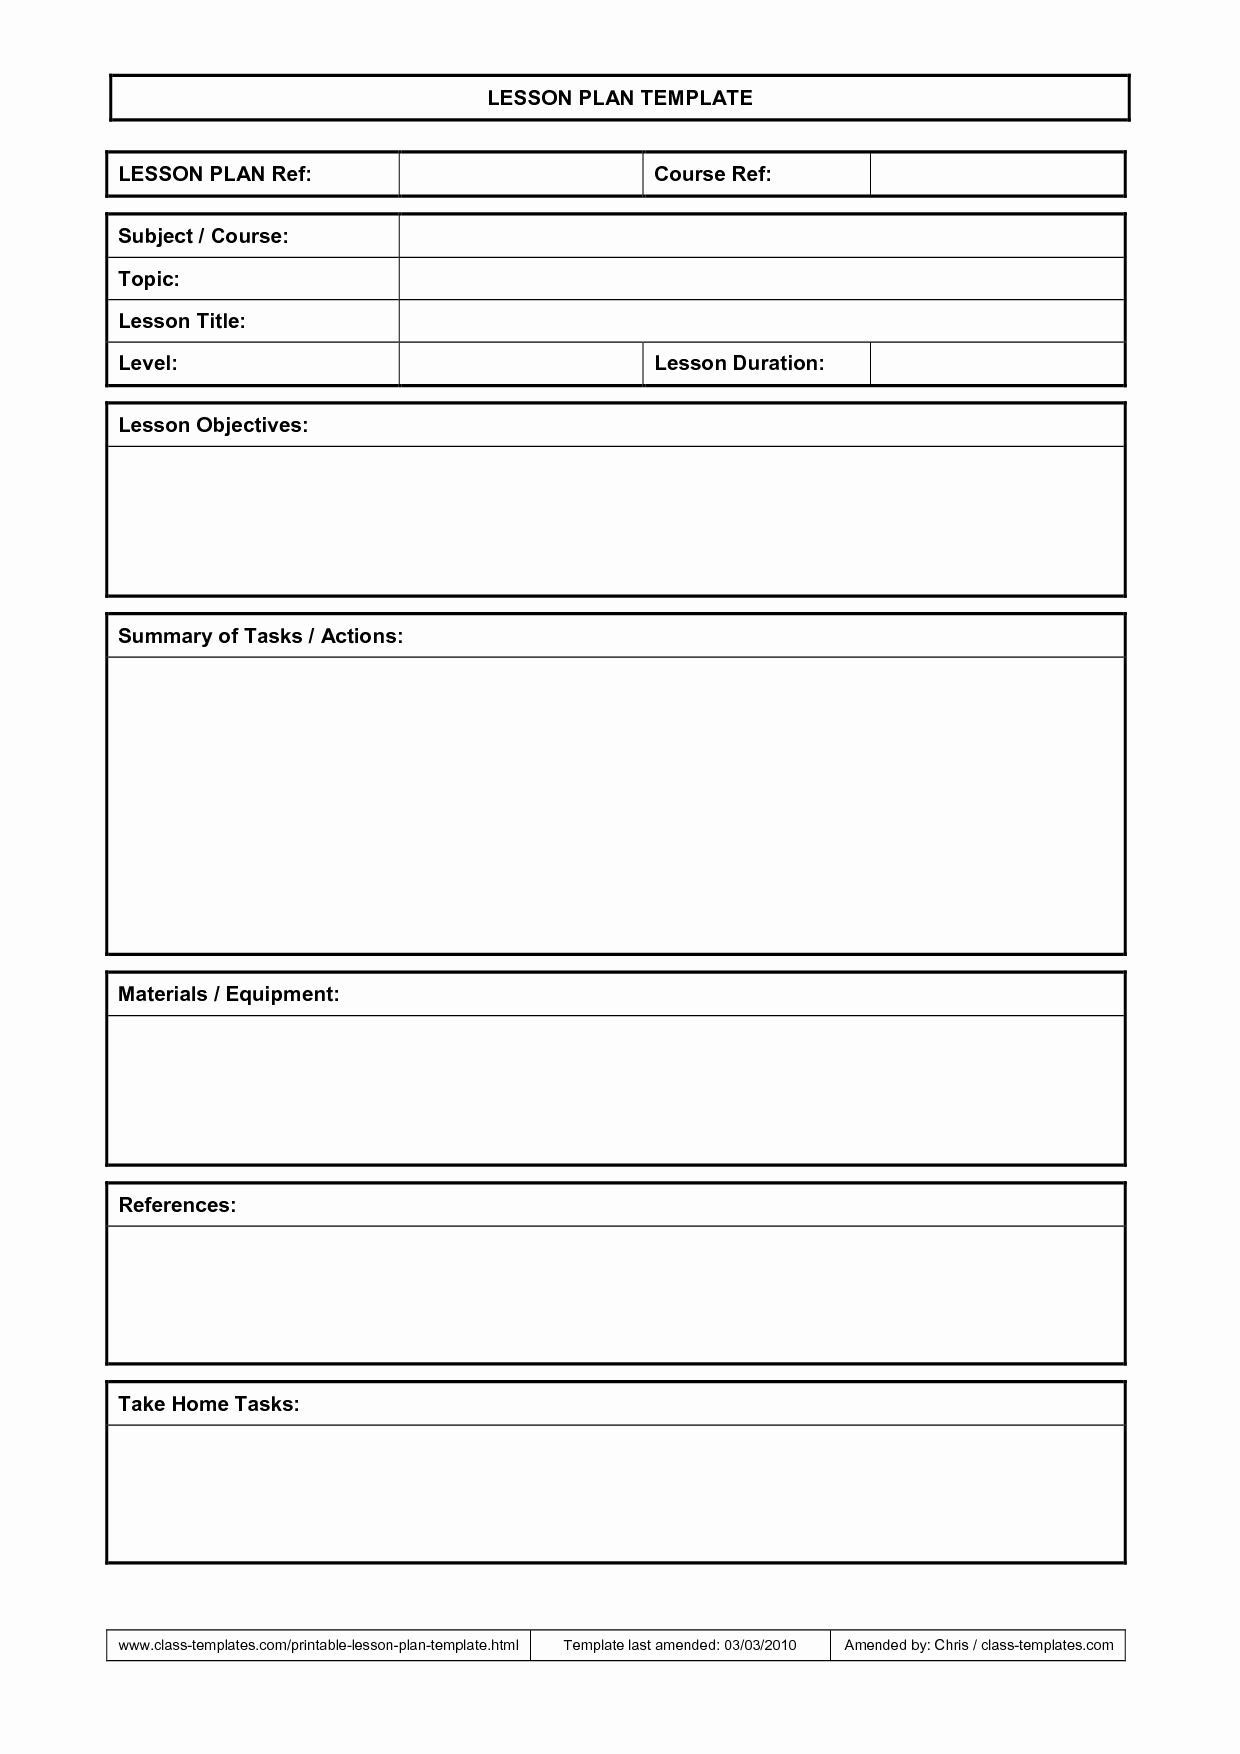 Lesson Plan Template Word Doc Inspirational Lesson Plan Template …